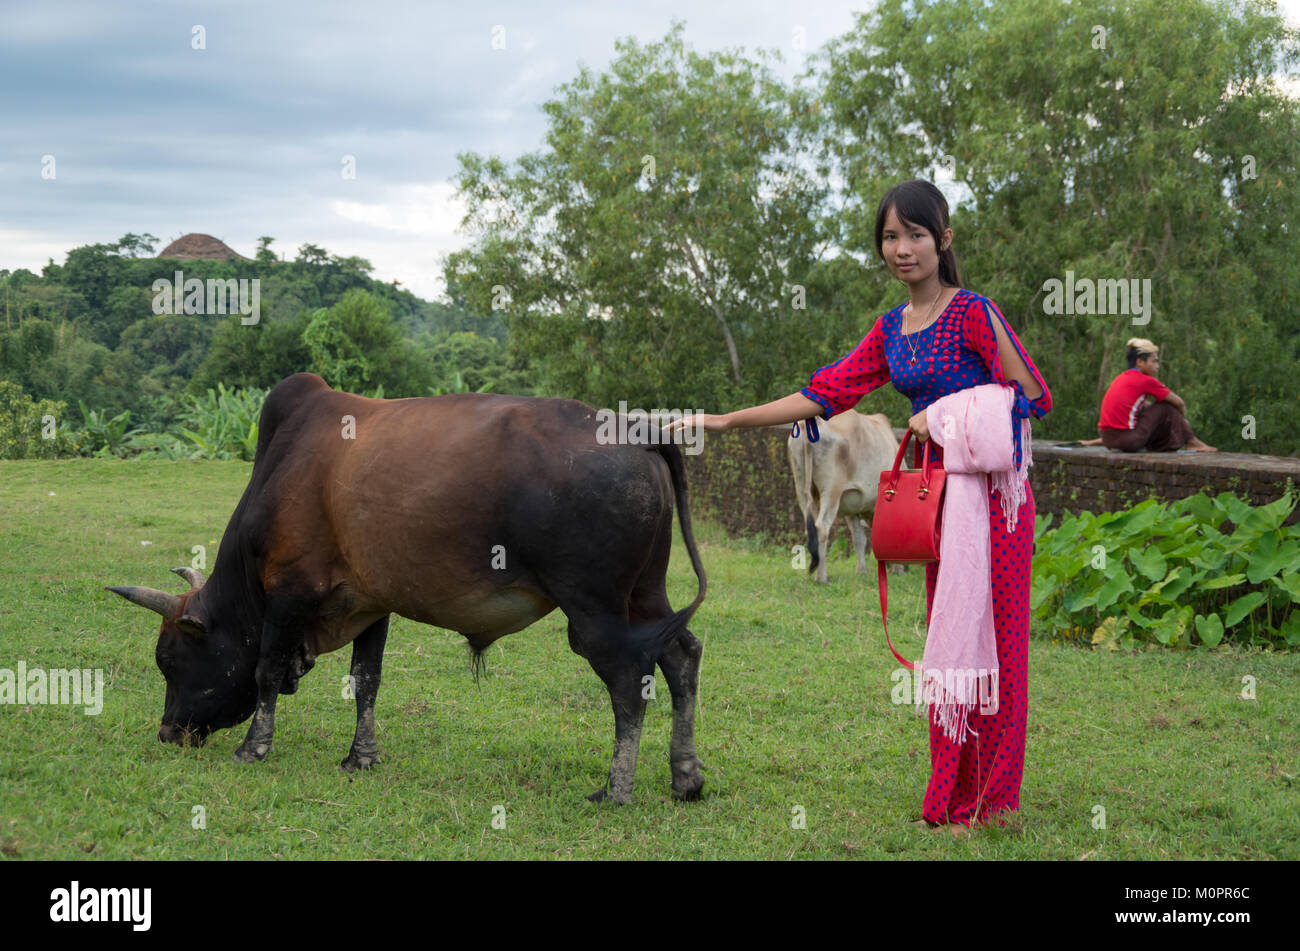 A young, pretty and local woman poses together with a strong bull on a field at an ancient temple in Mrauk U, Rakhine State, Myanmar Stock Photo